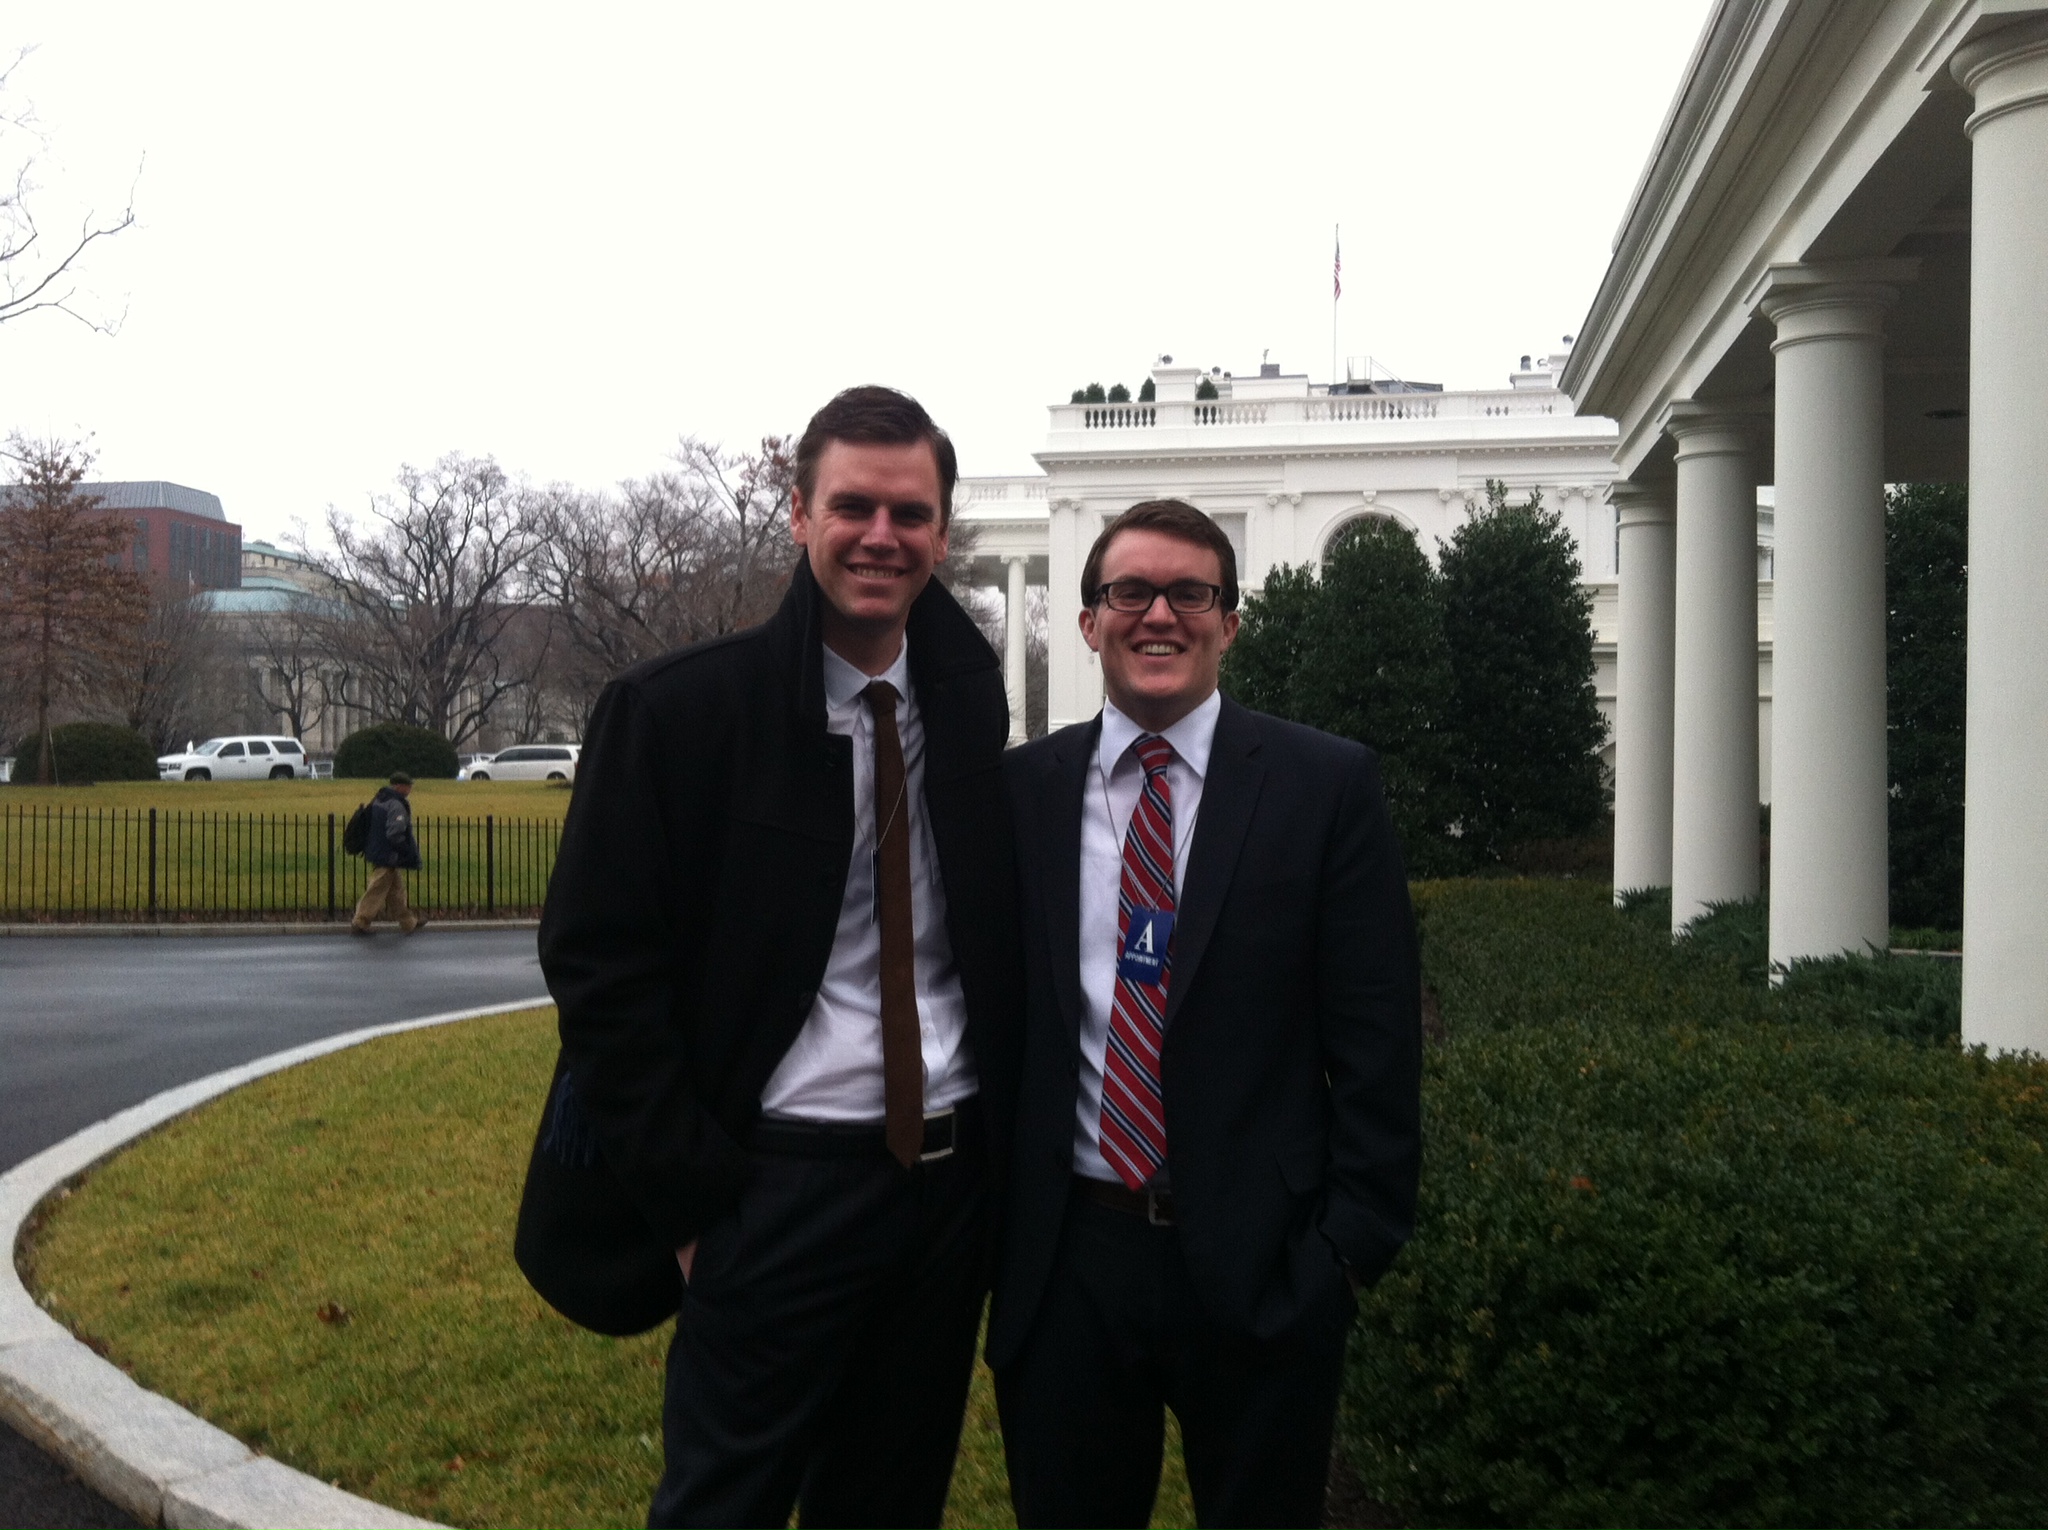 Ben Keesey and Michael Poffenberger at White House